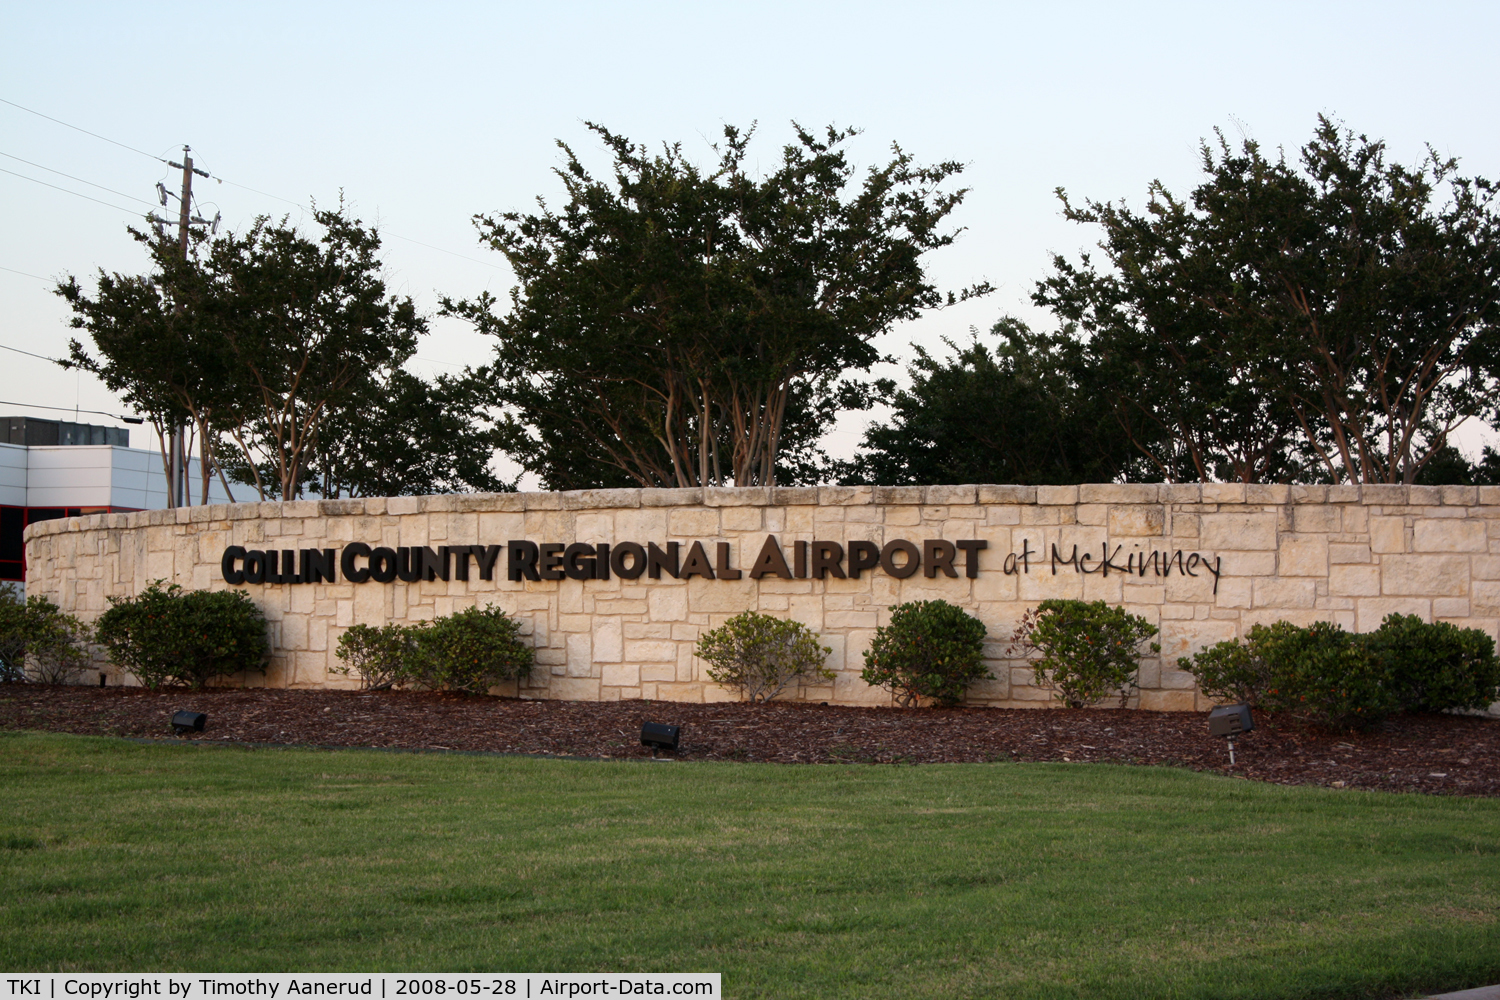 Collin County Regional At Mc Kinney Airport (TKI) - Welcome sign